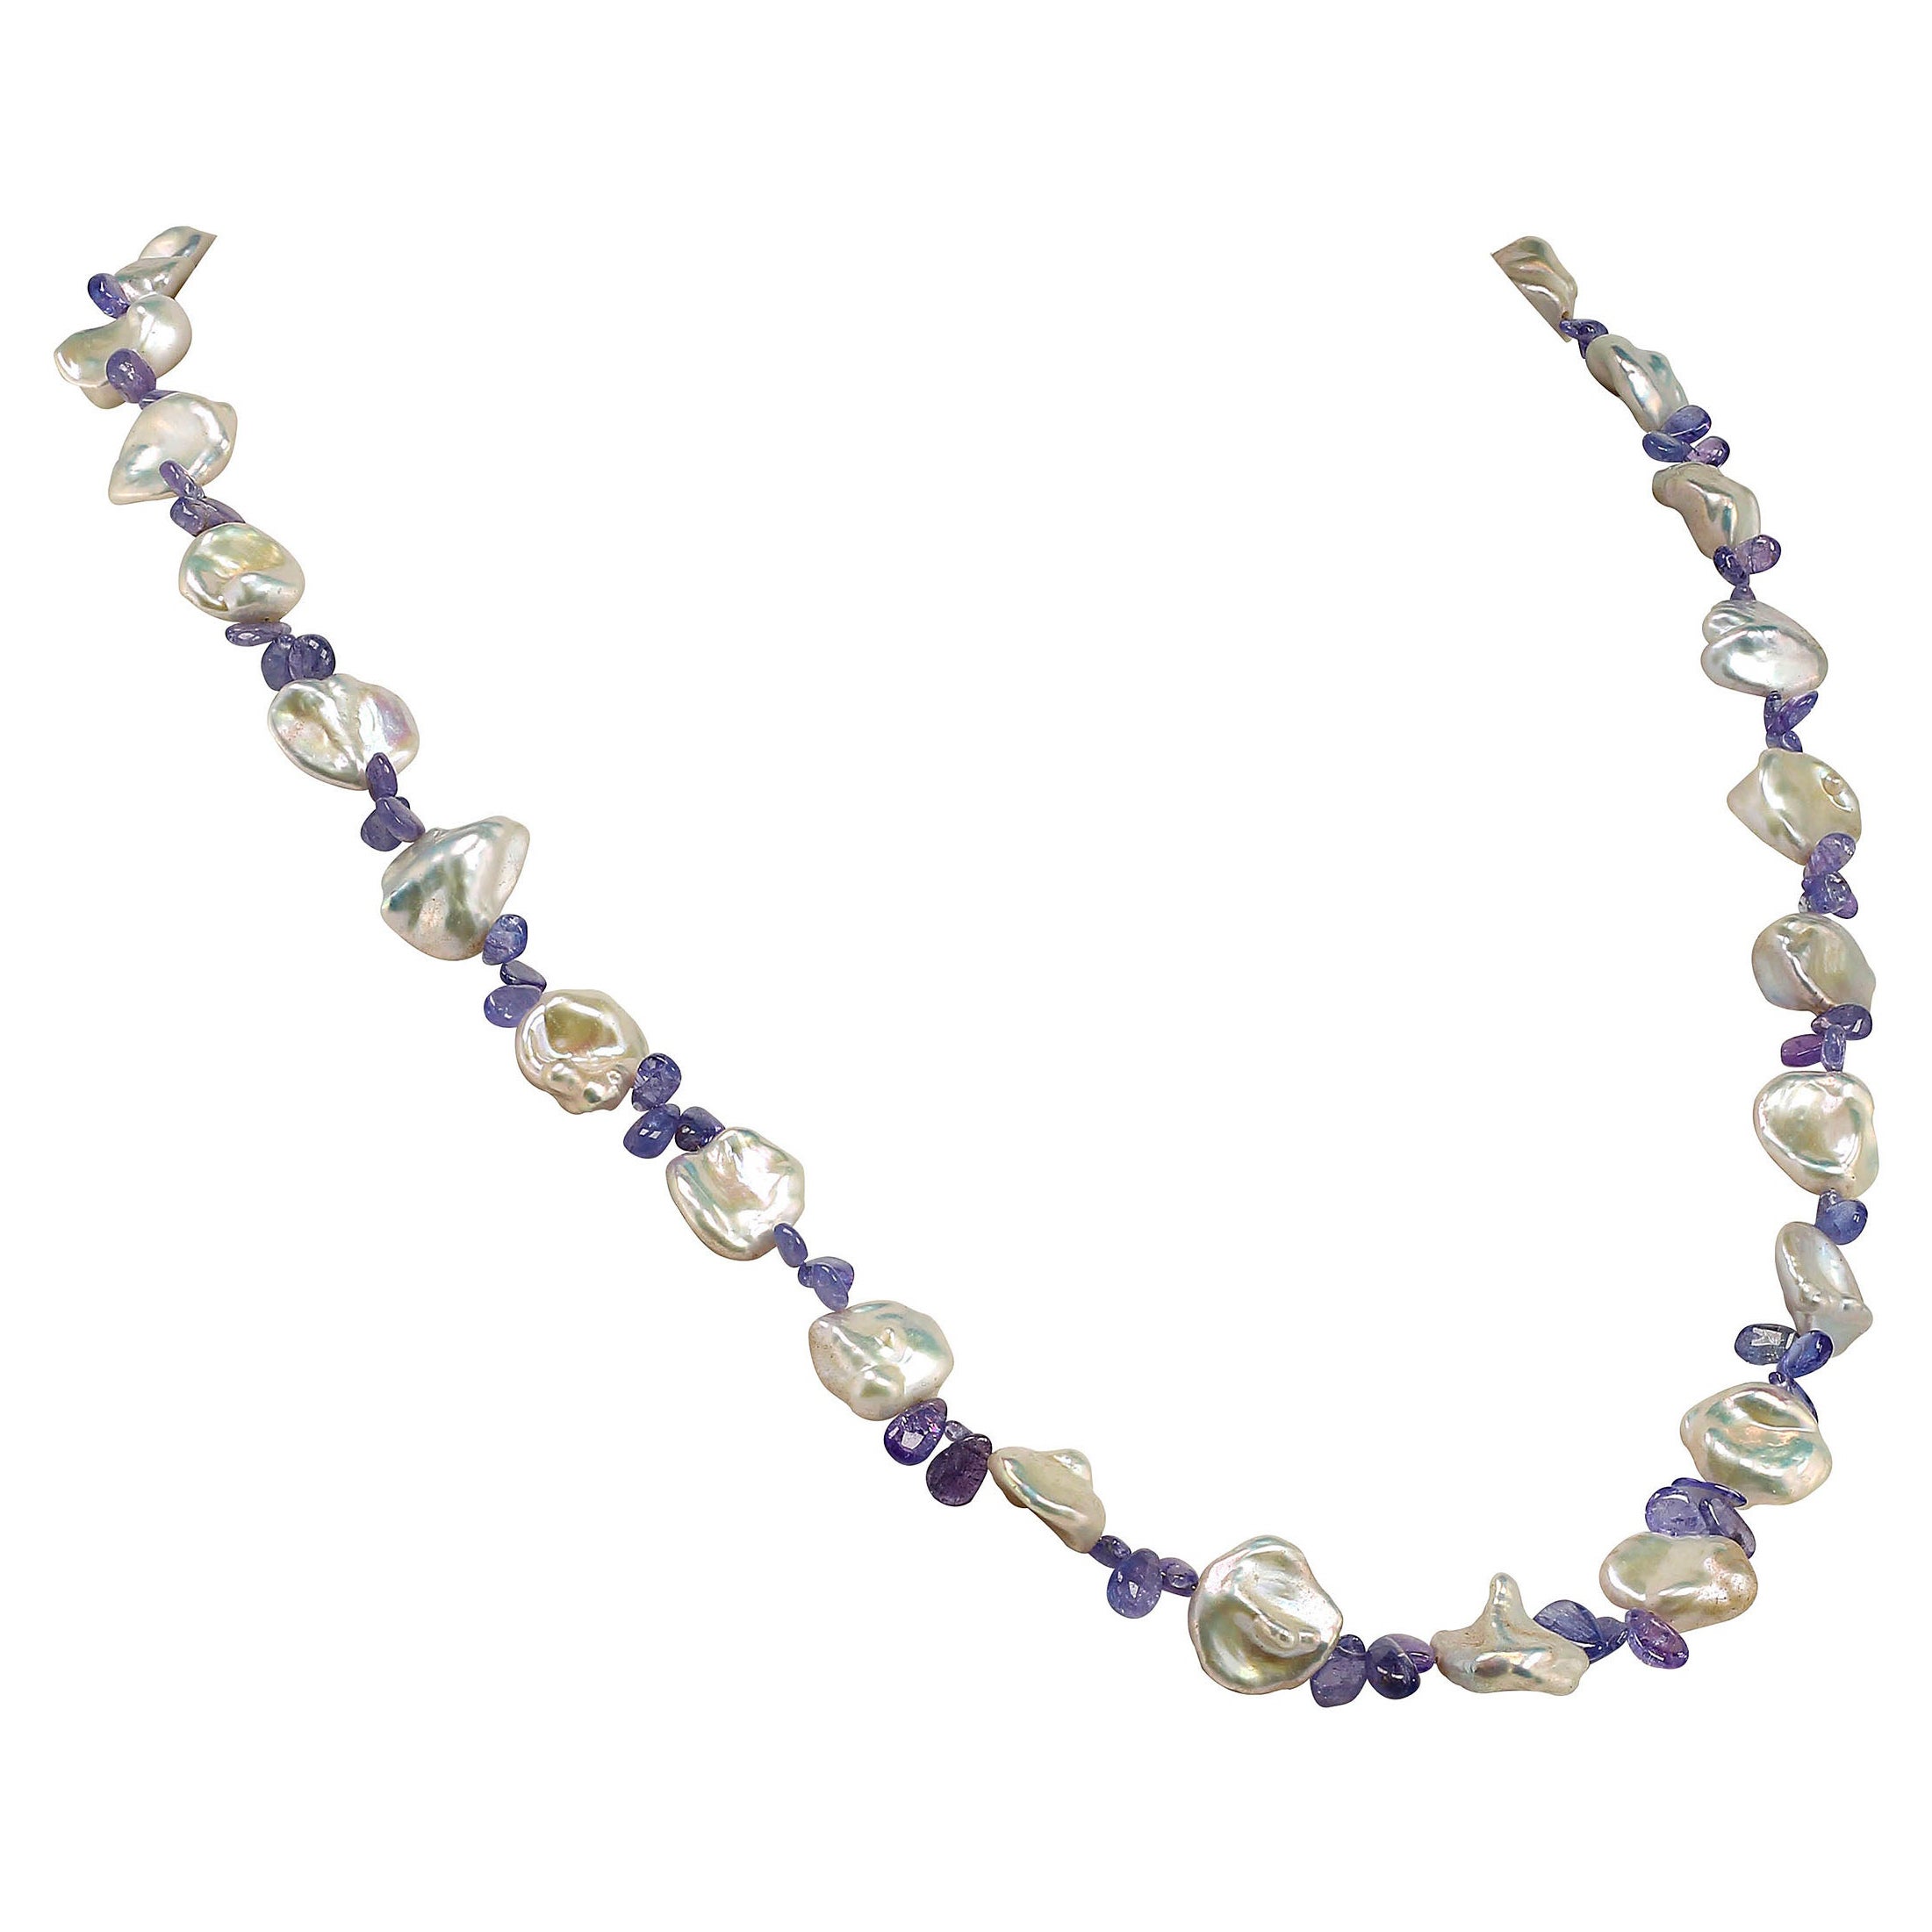 'Because you deserve to own Pearls'

Unique 27 inch necklace of Glowing, Iridescent roundish Keshi Pearls and briolette Tanzanites. The Tanzanites flutter between each Keshi Pearl. The Keshi Pearls are a gorgeous glowing white with iridescent